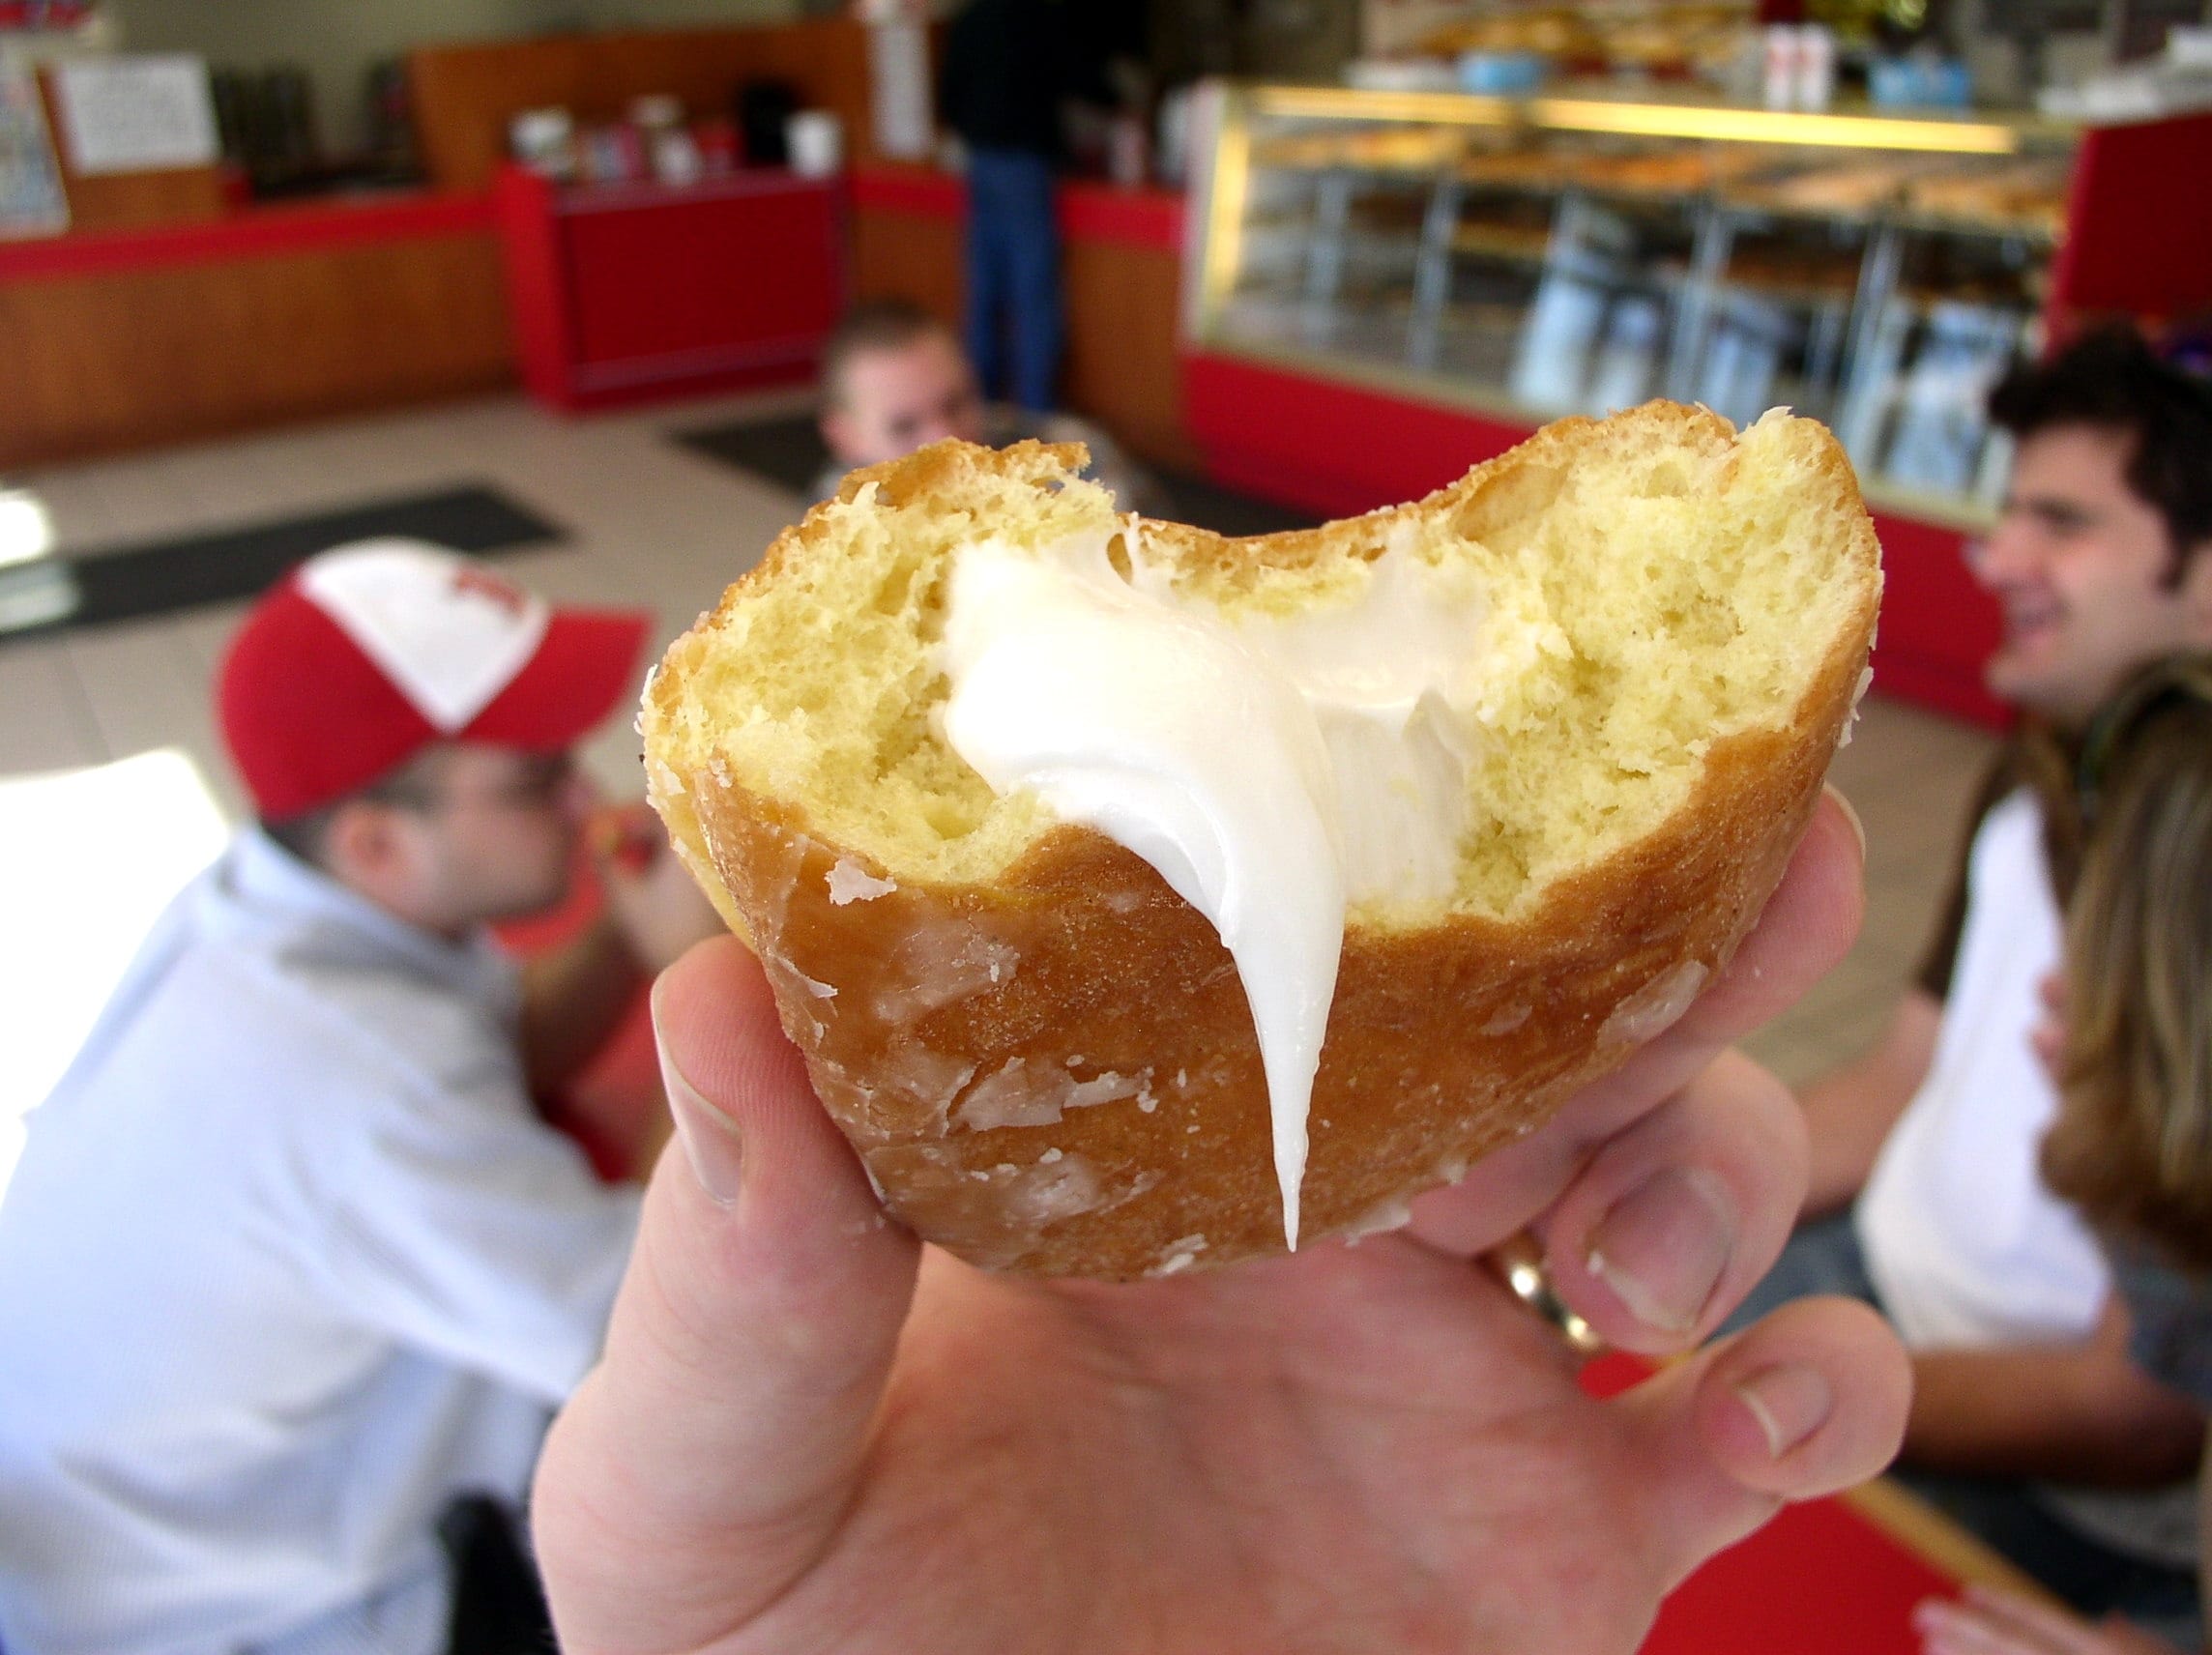 23-TopDonut, a picture from the donut tour